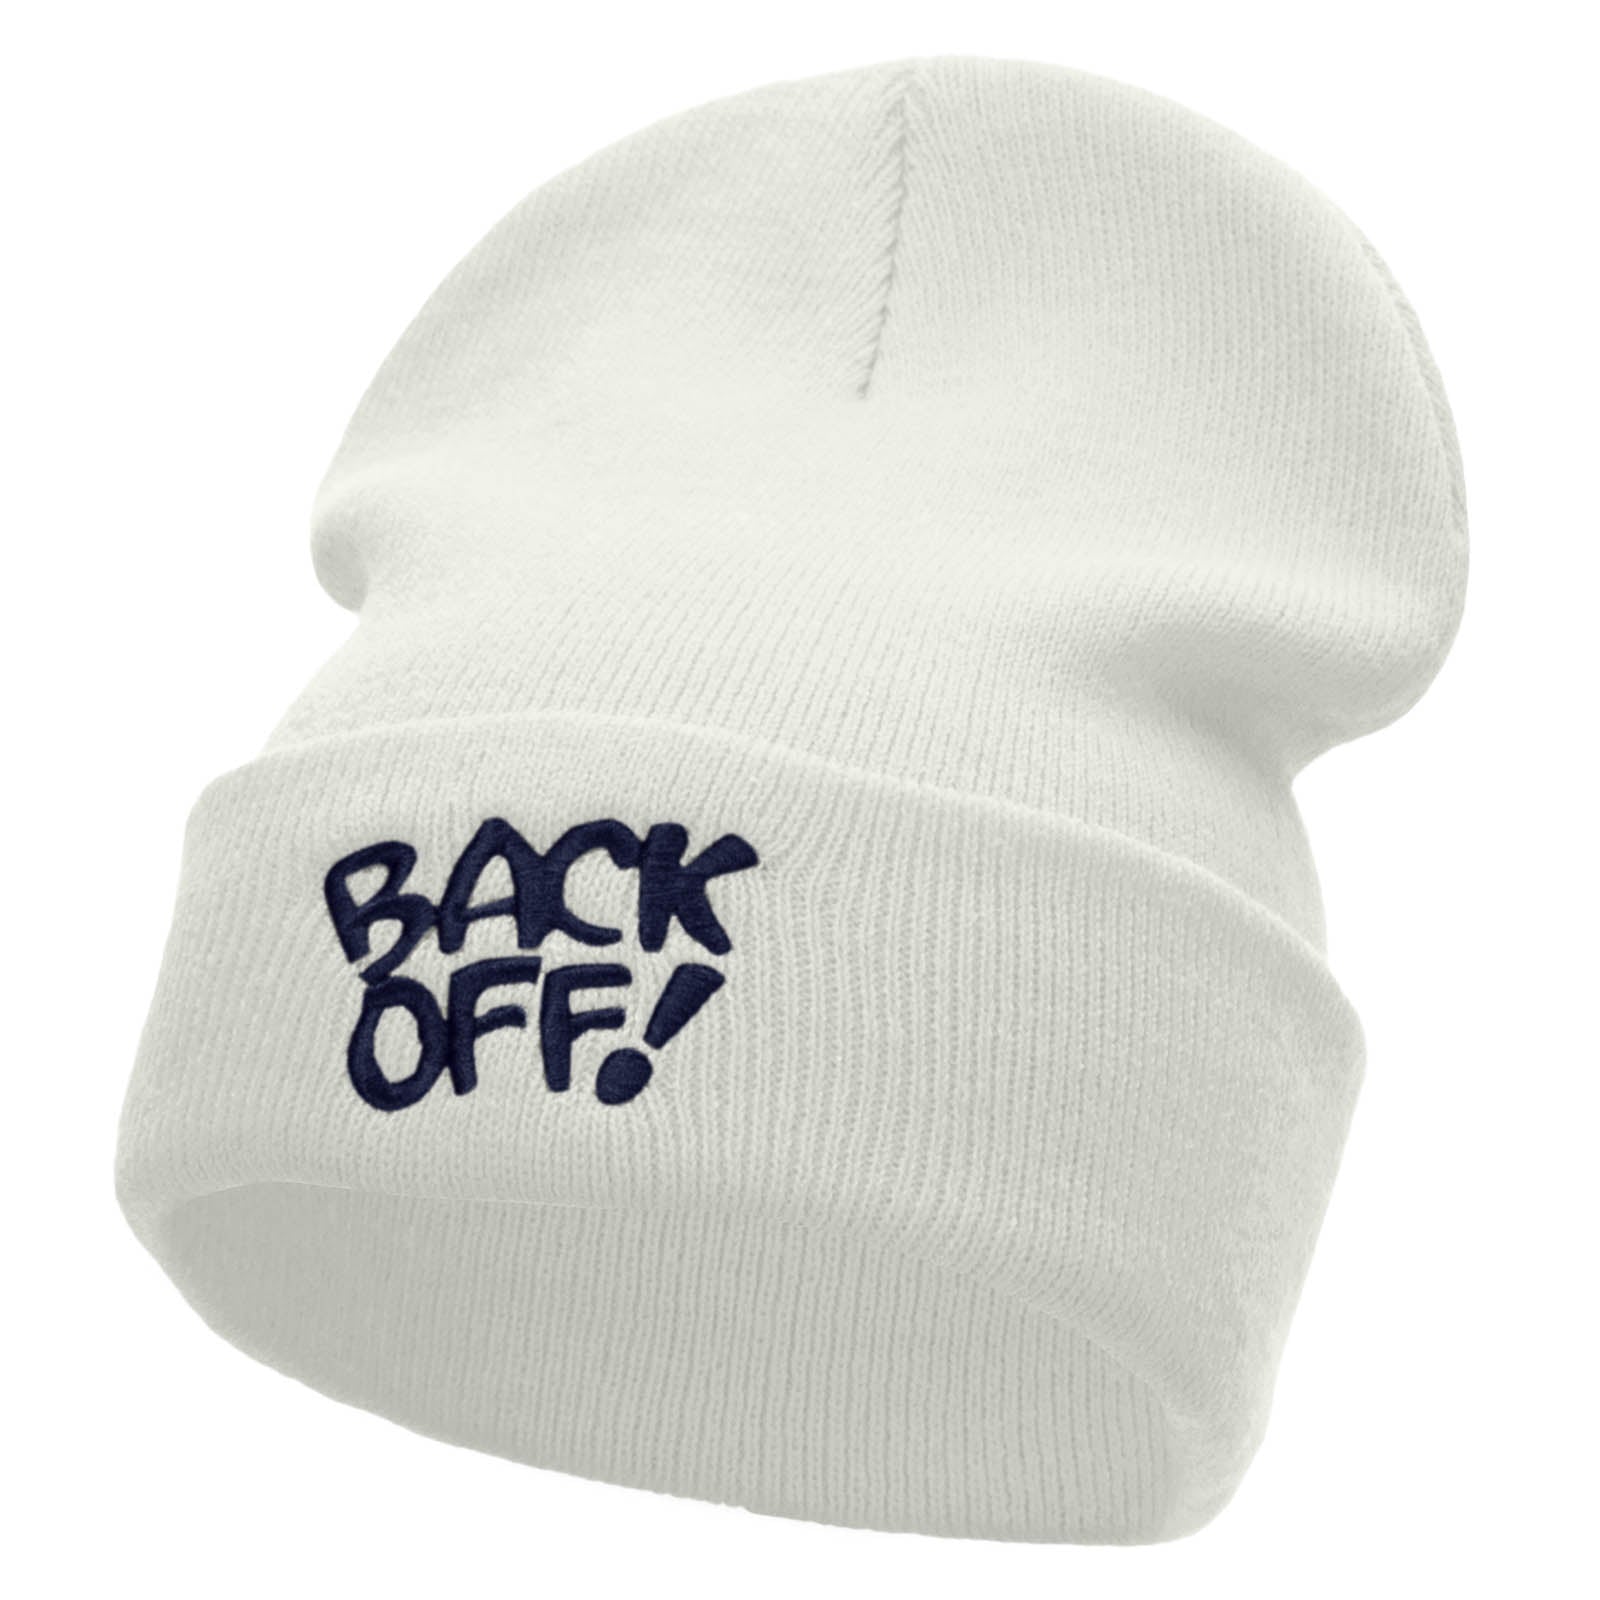 Back Off Phrase Embroidered 12 Inch Long Knitted Beanie - White OSFM